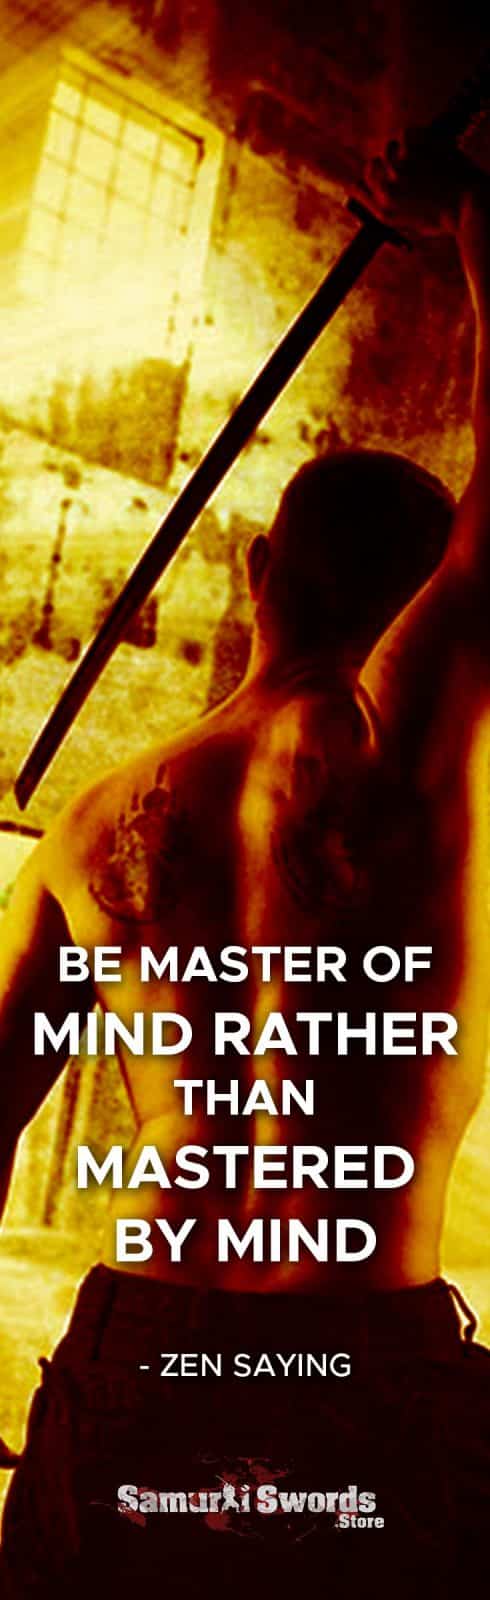 Be master OF mind rather than mastered BY mind. - Zen Saying